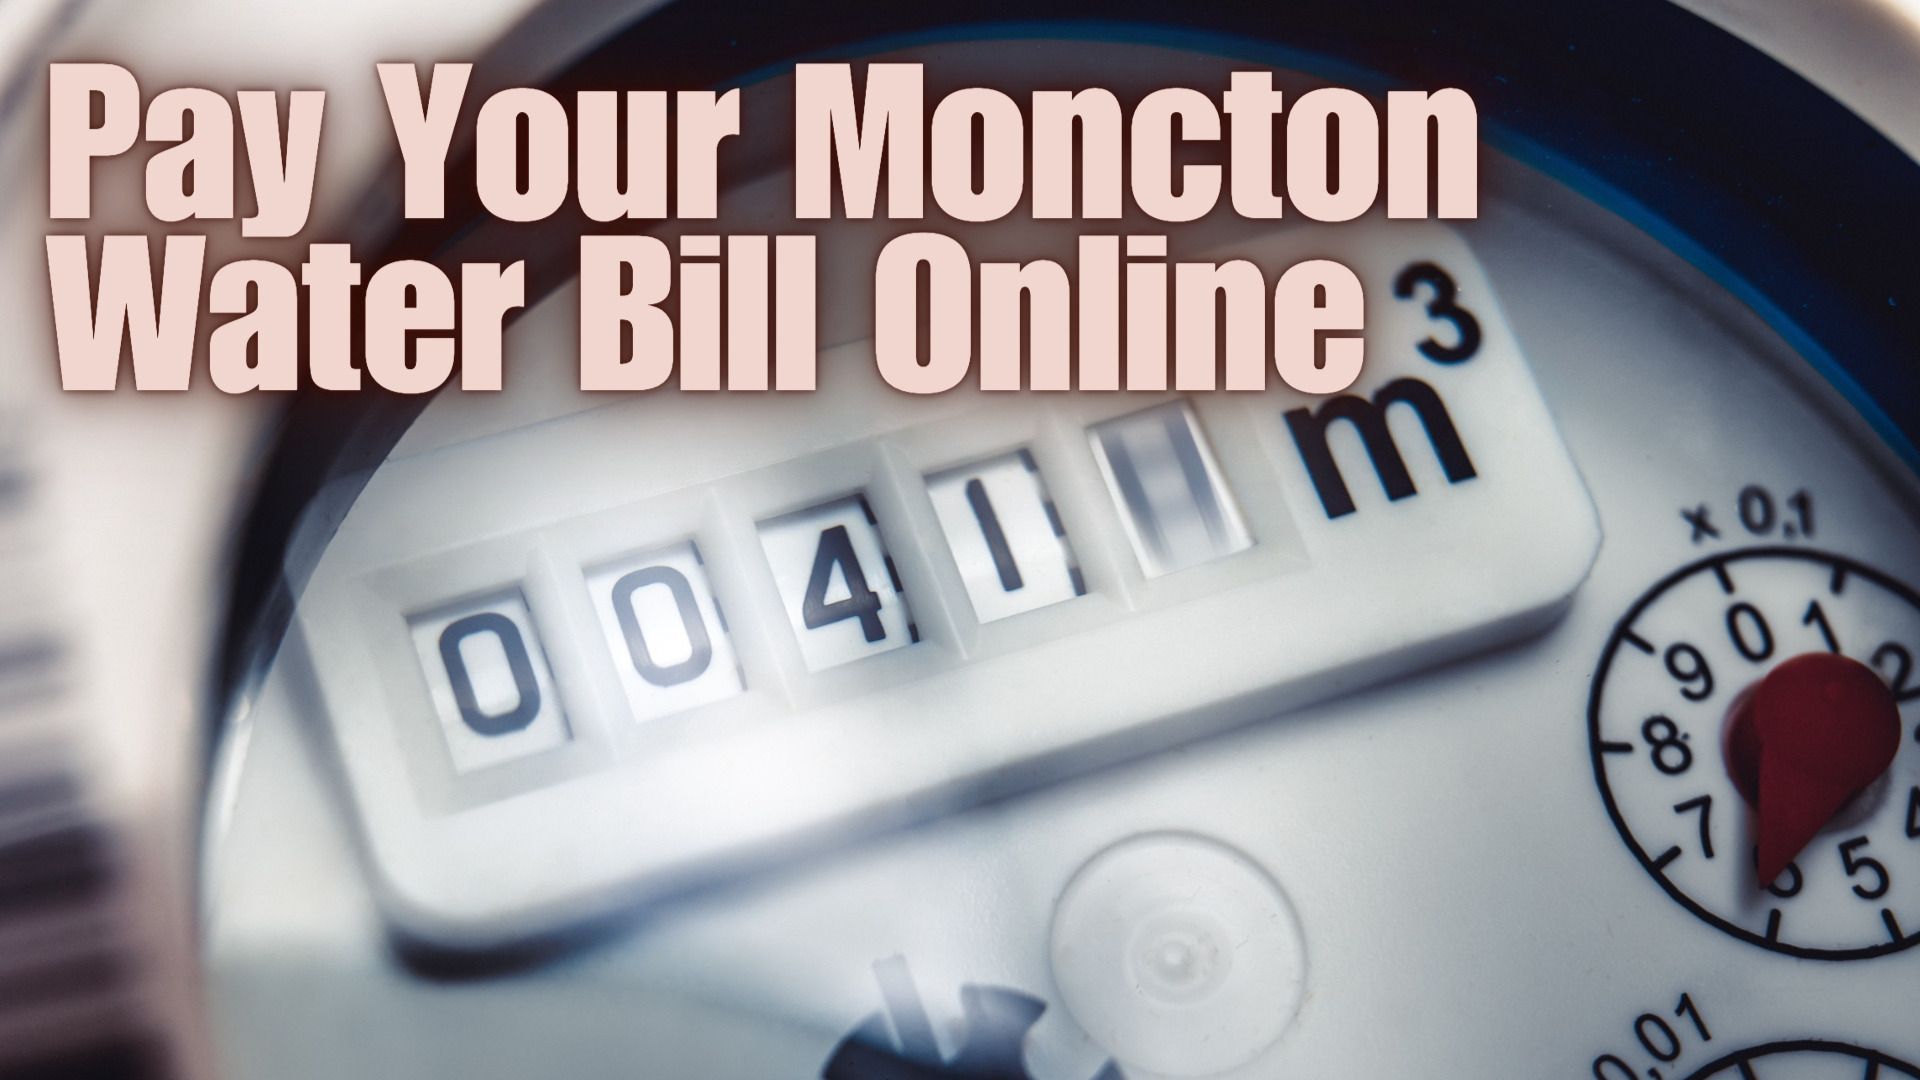 How To Pay Your Water Bill Online In Moncton